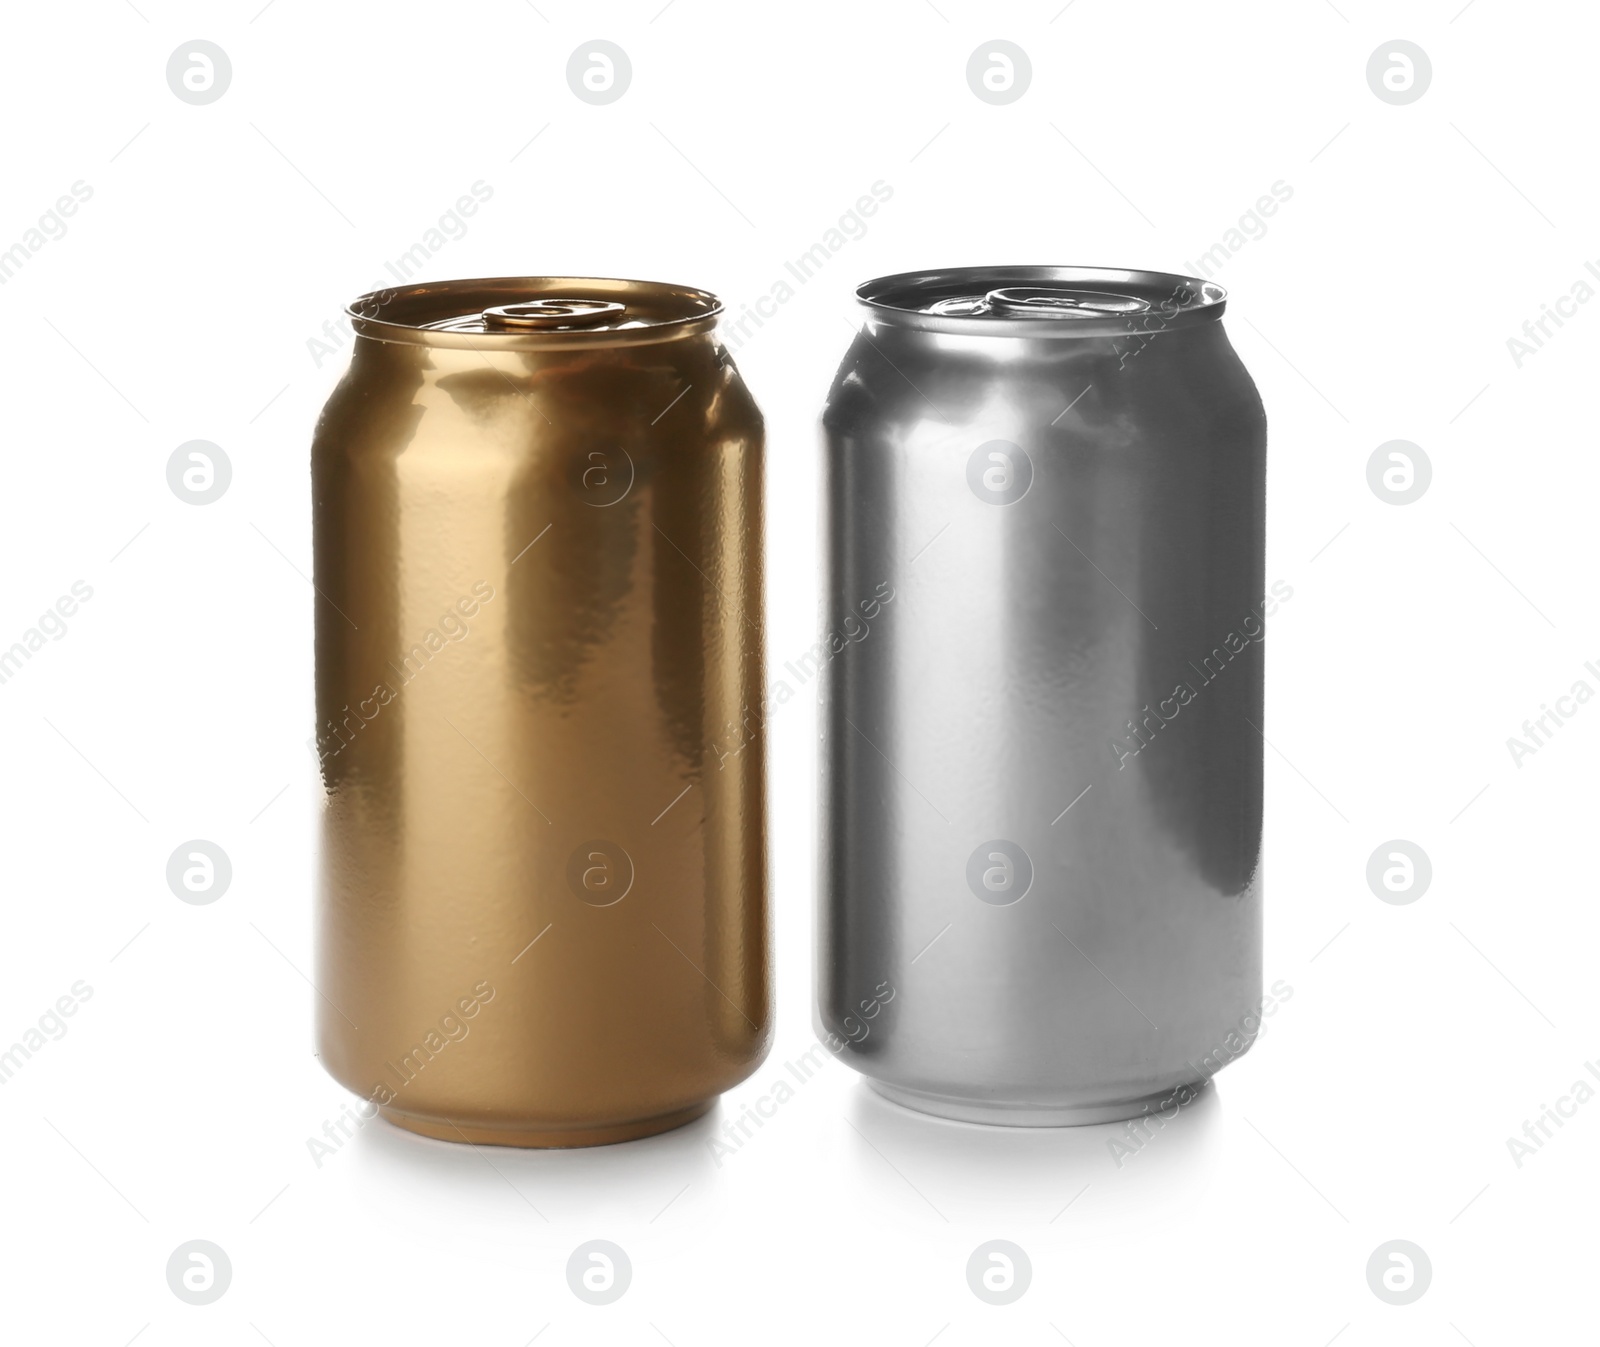 Photo of Tin cans with beverages on white background